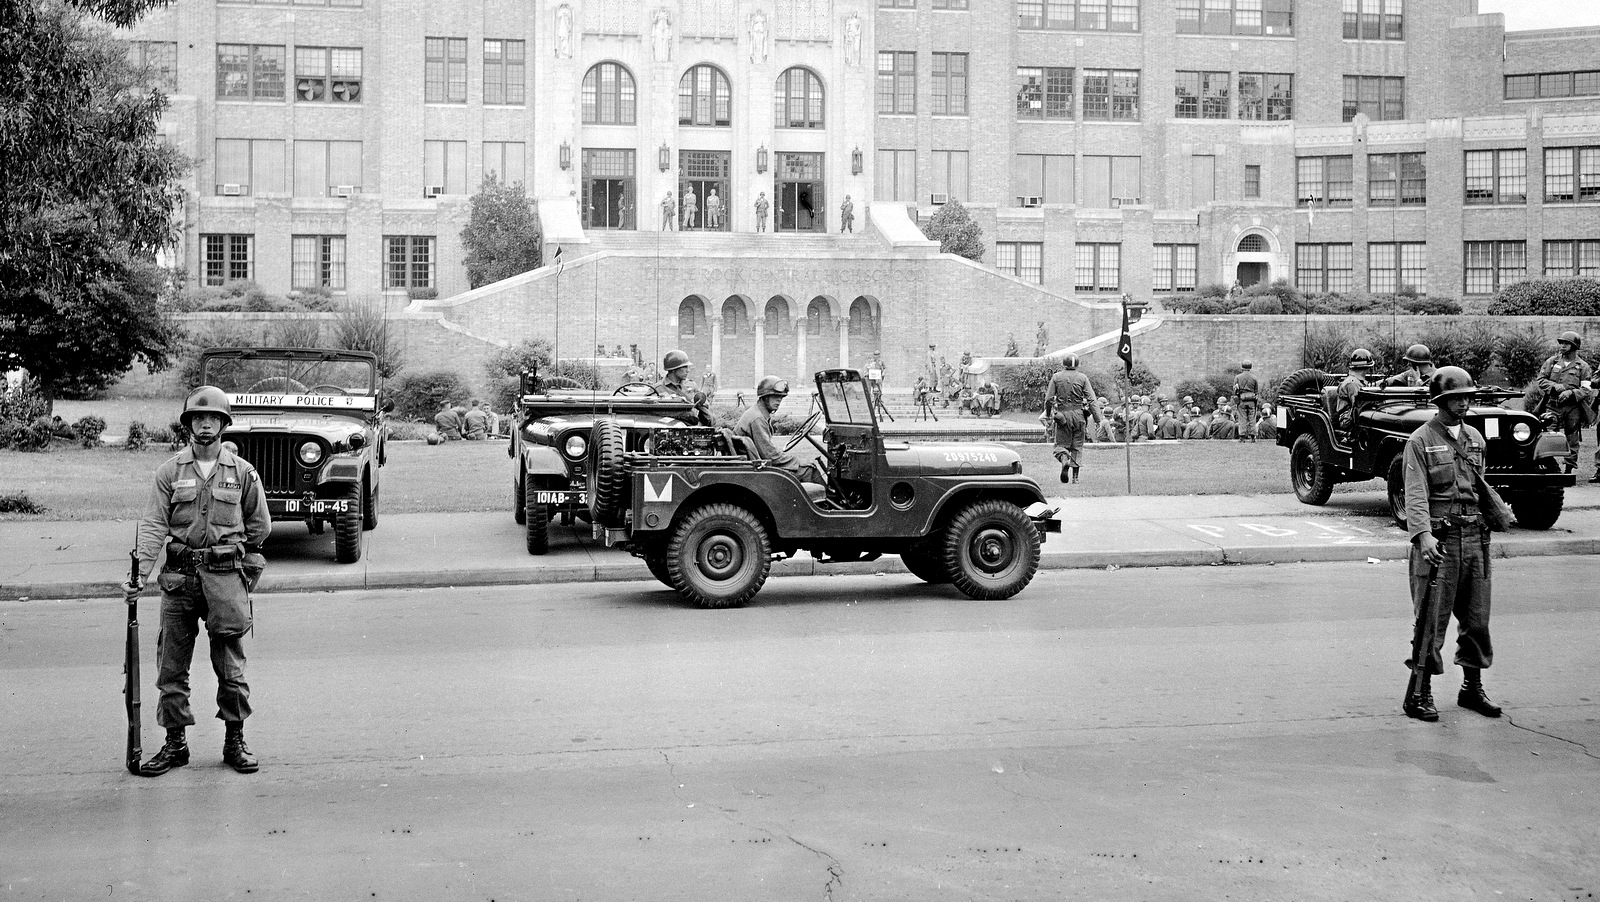 101st Airborne Division take up positions outside Central High School in Little Rock, Ark. The troopers are on duty to enforce integration at the school. Sept. 26, 1957. (AP Photo)